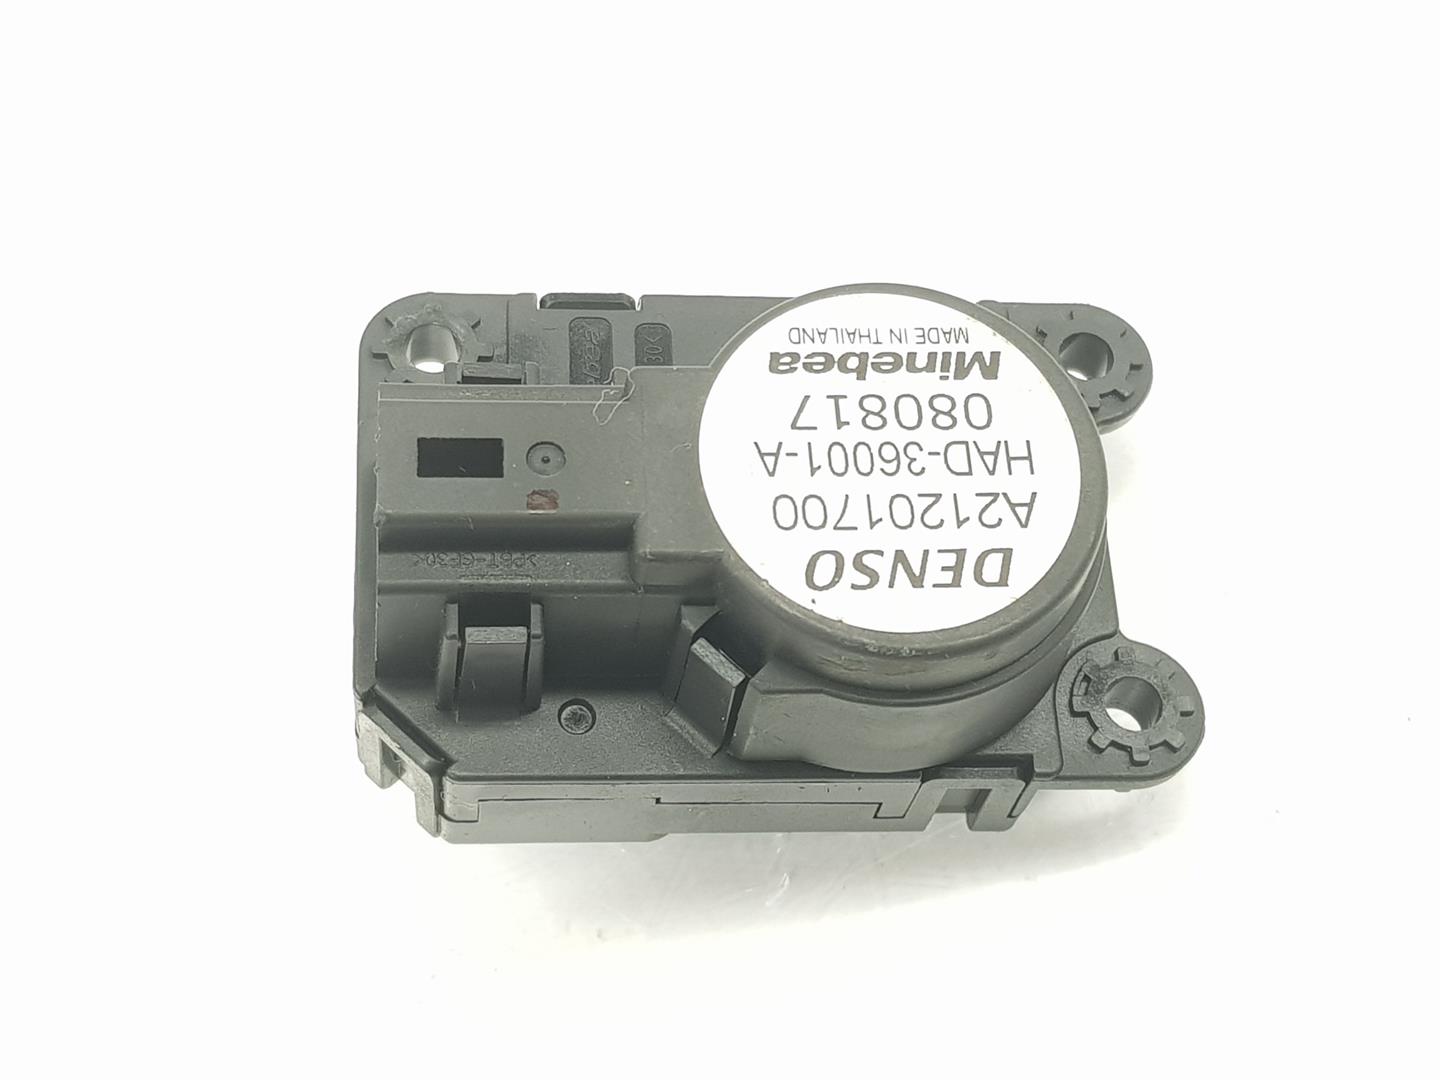 PEUGEOT 3008 SUV (2016-present) Air Conditioner Air Flow Valve Motor A21201700, A21201700 24208564